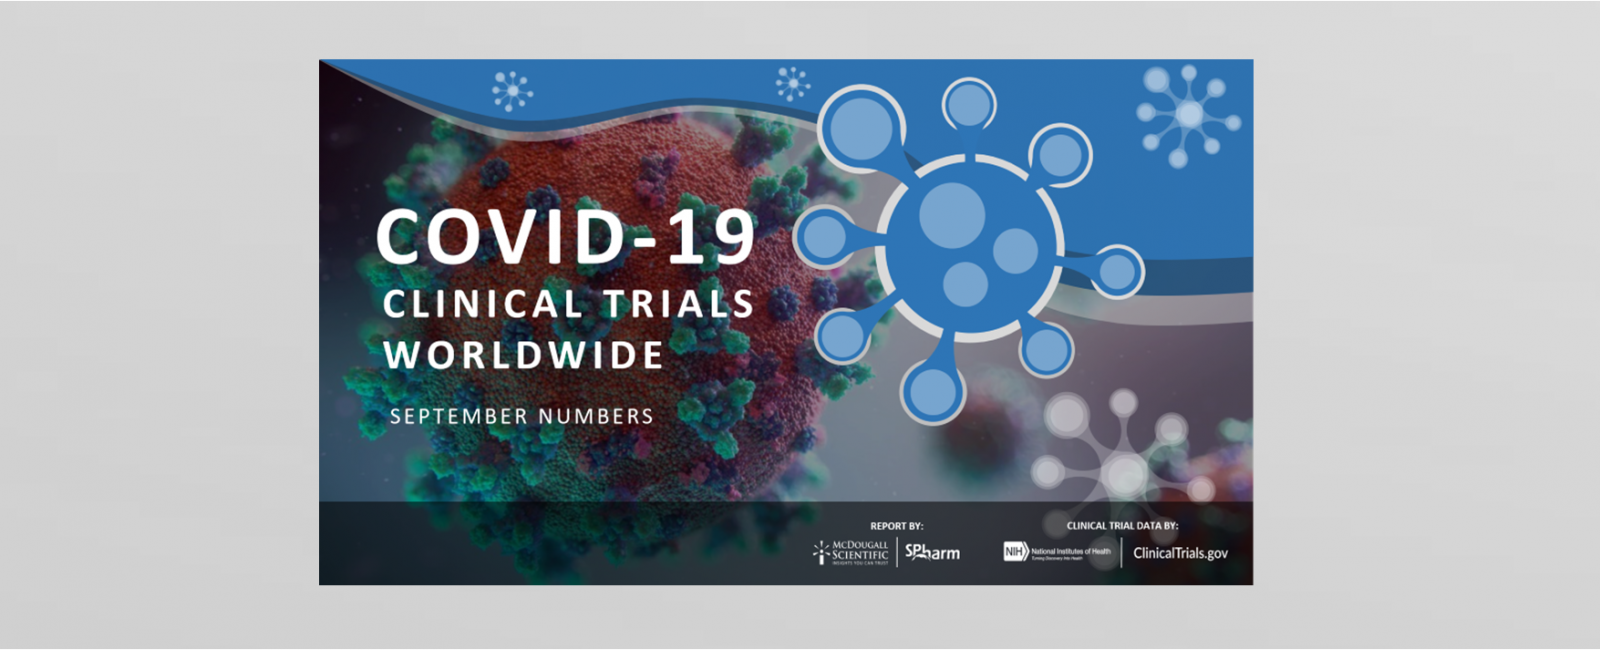 Covid-19 Clinical Trials Worldwide numbers for September